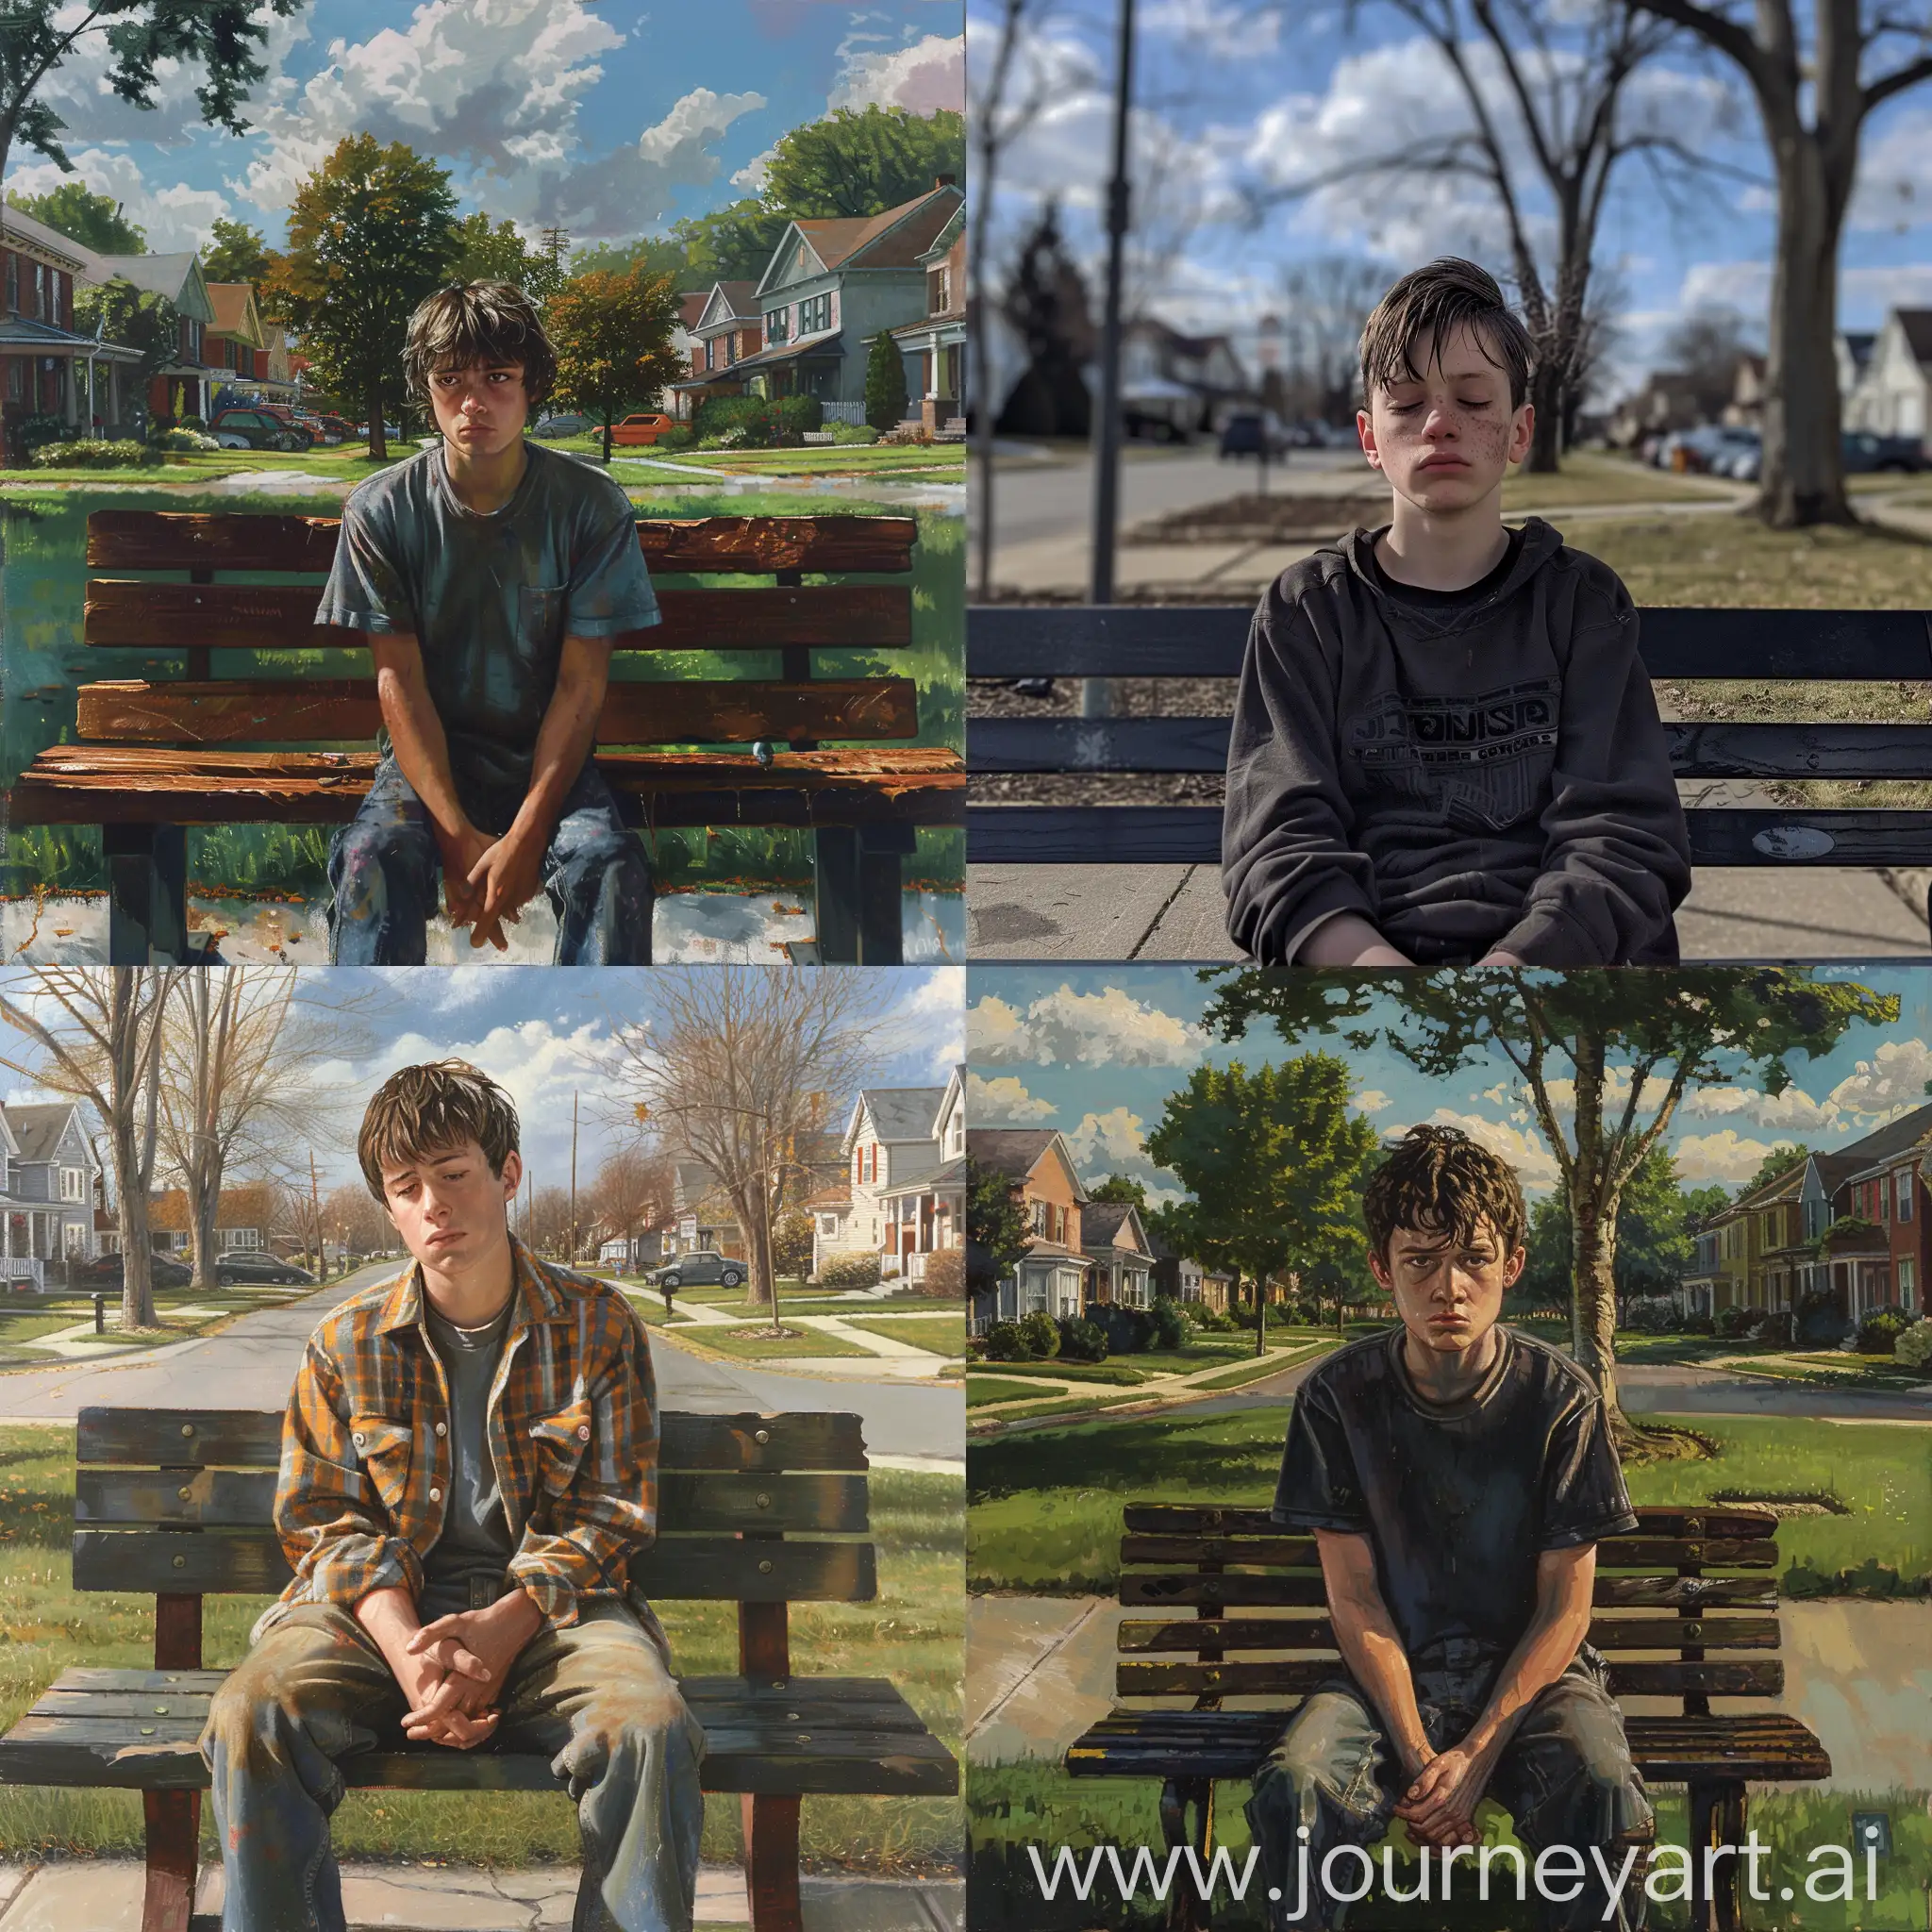 "A 23-year-old boy named John, looking worn-out and broke, sitting on a park bench in a suburban neighborhood."